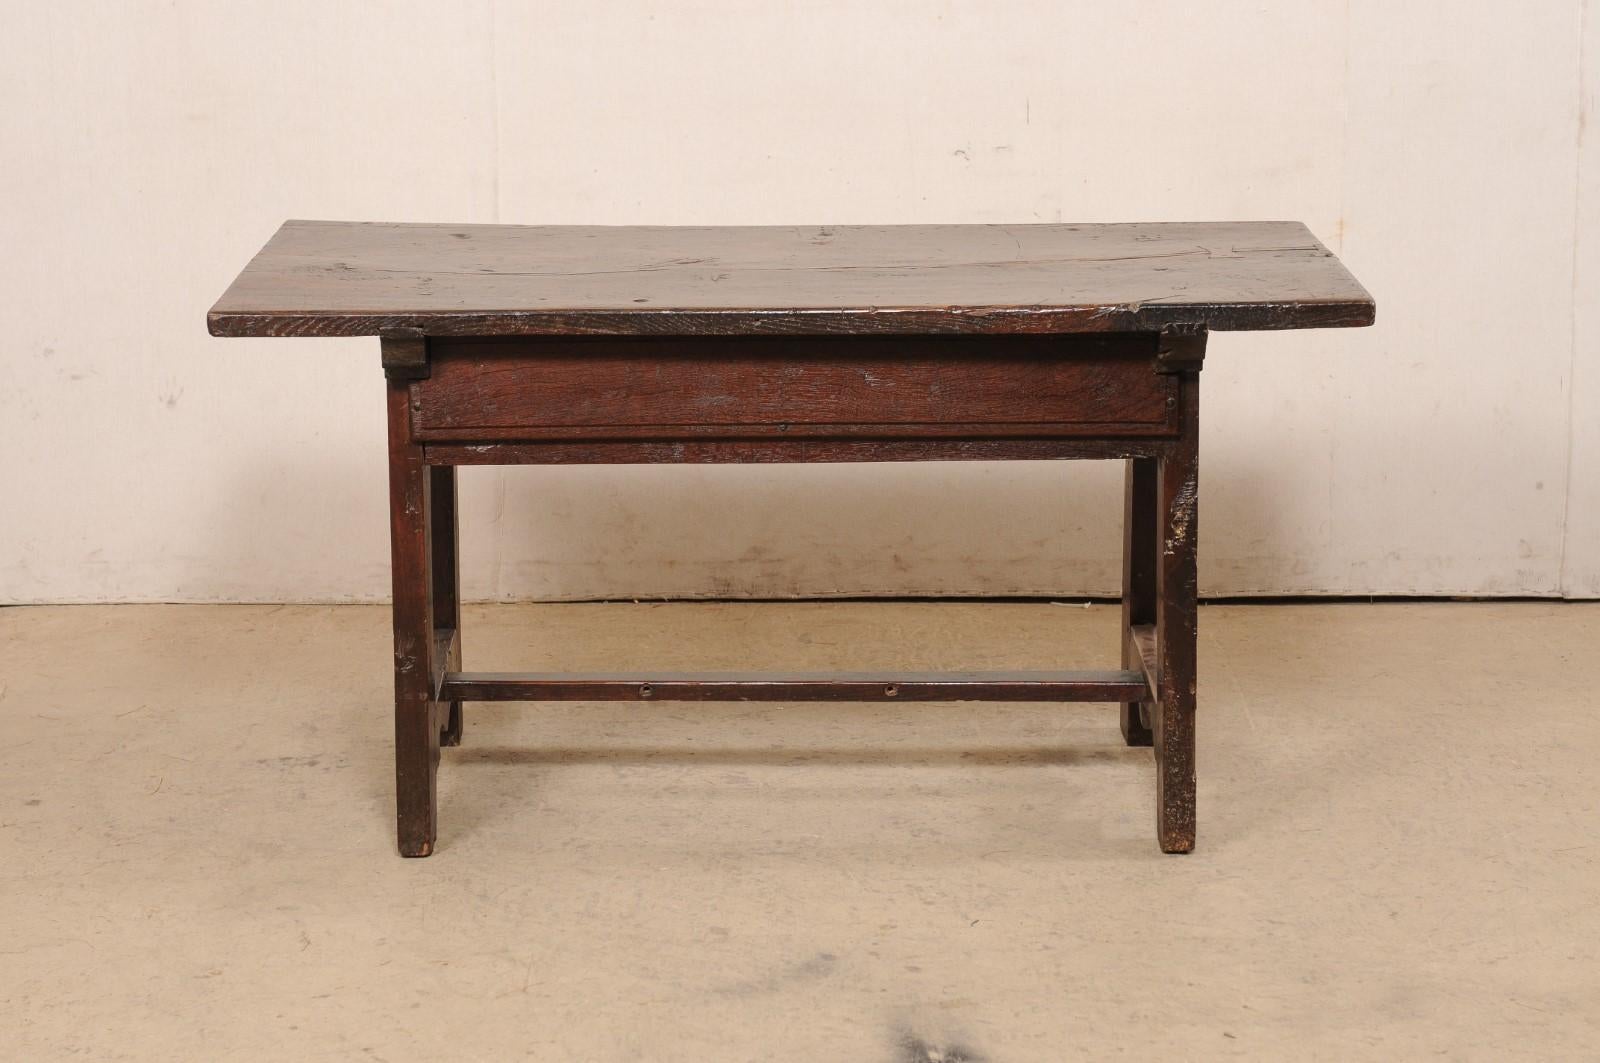 18th C. Spanish Beautifully Rustic Carved-Wood Trestle-Leg Table with Drawers 4